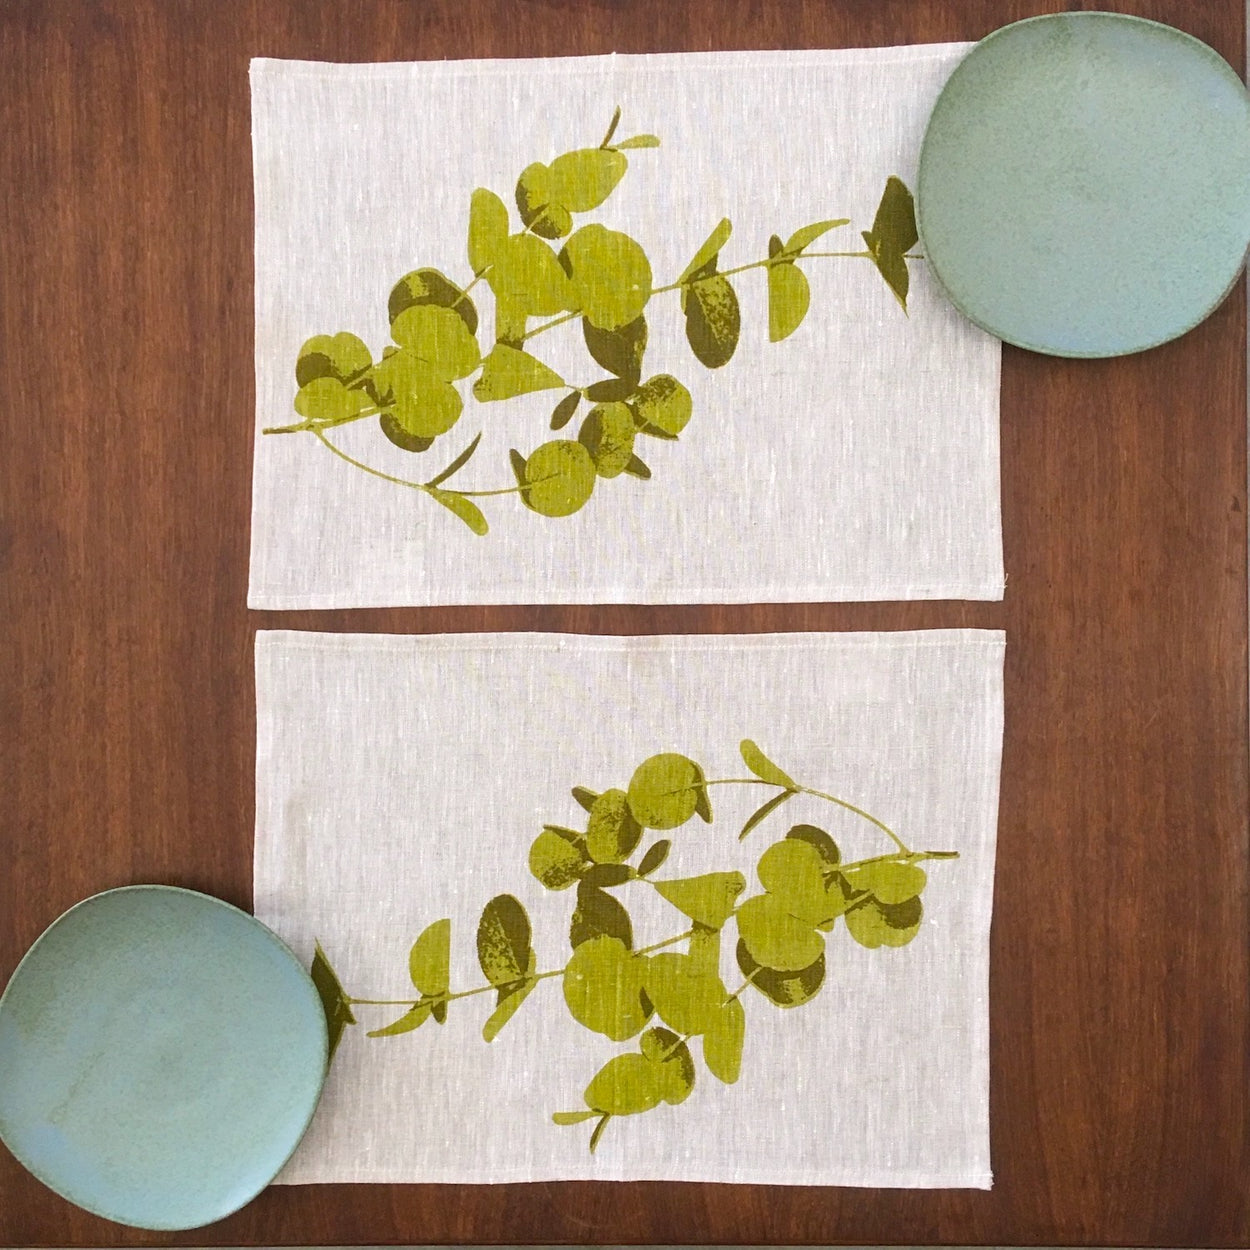 Photograph of eucalyptus leaves screenprinted on placemats.